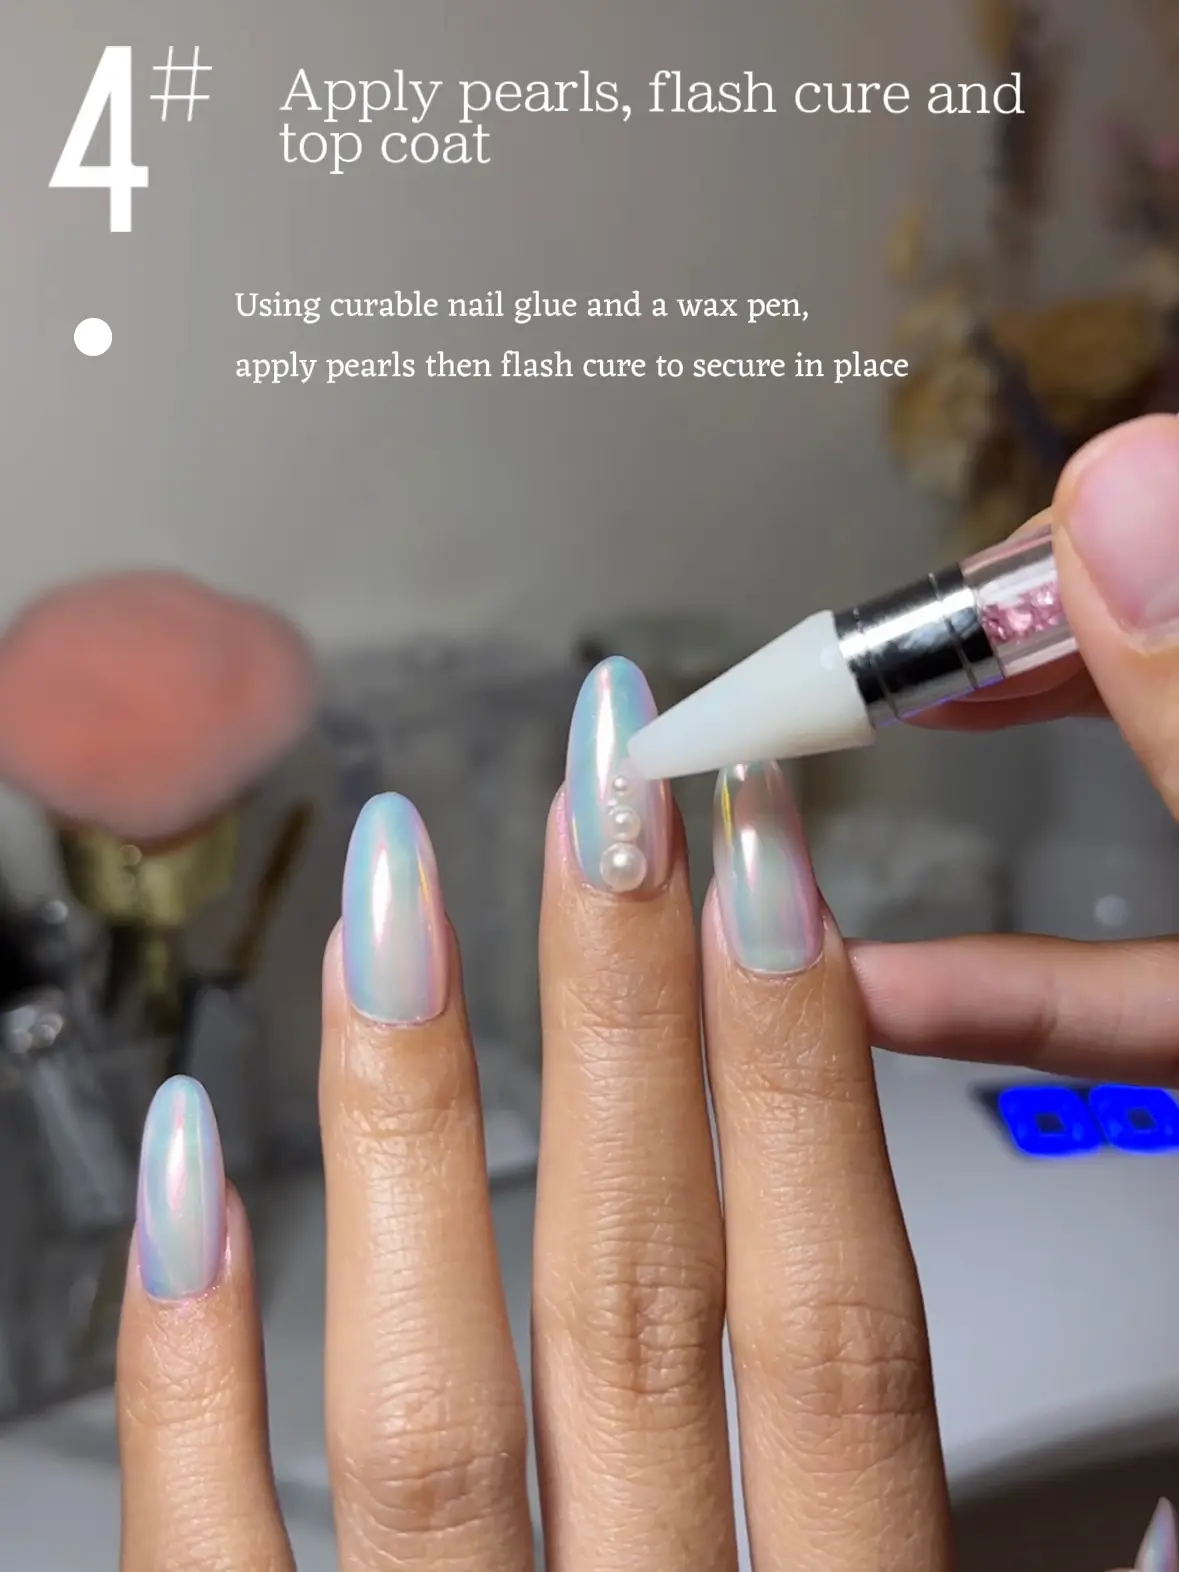 Mother-of-Pearl Nails Are Bringing Mermaidcore to Your Fingertips